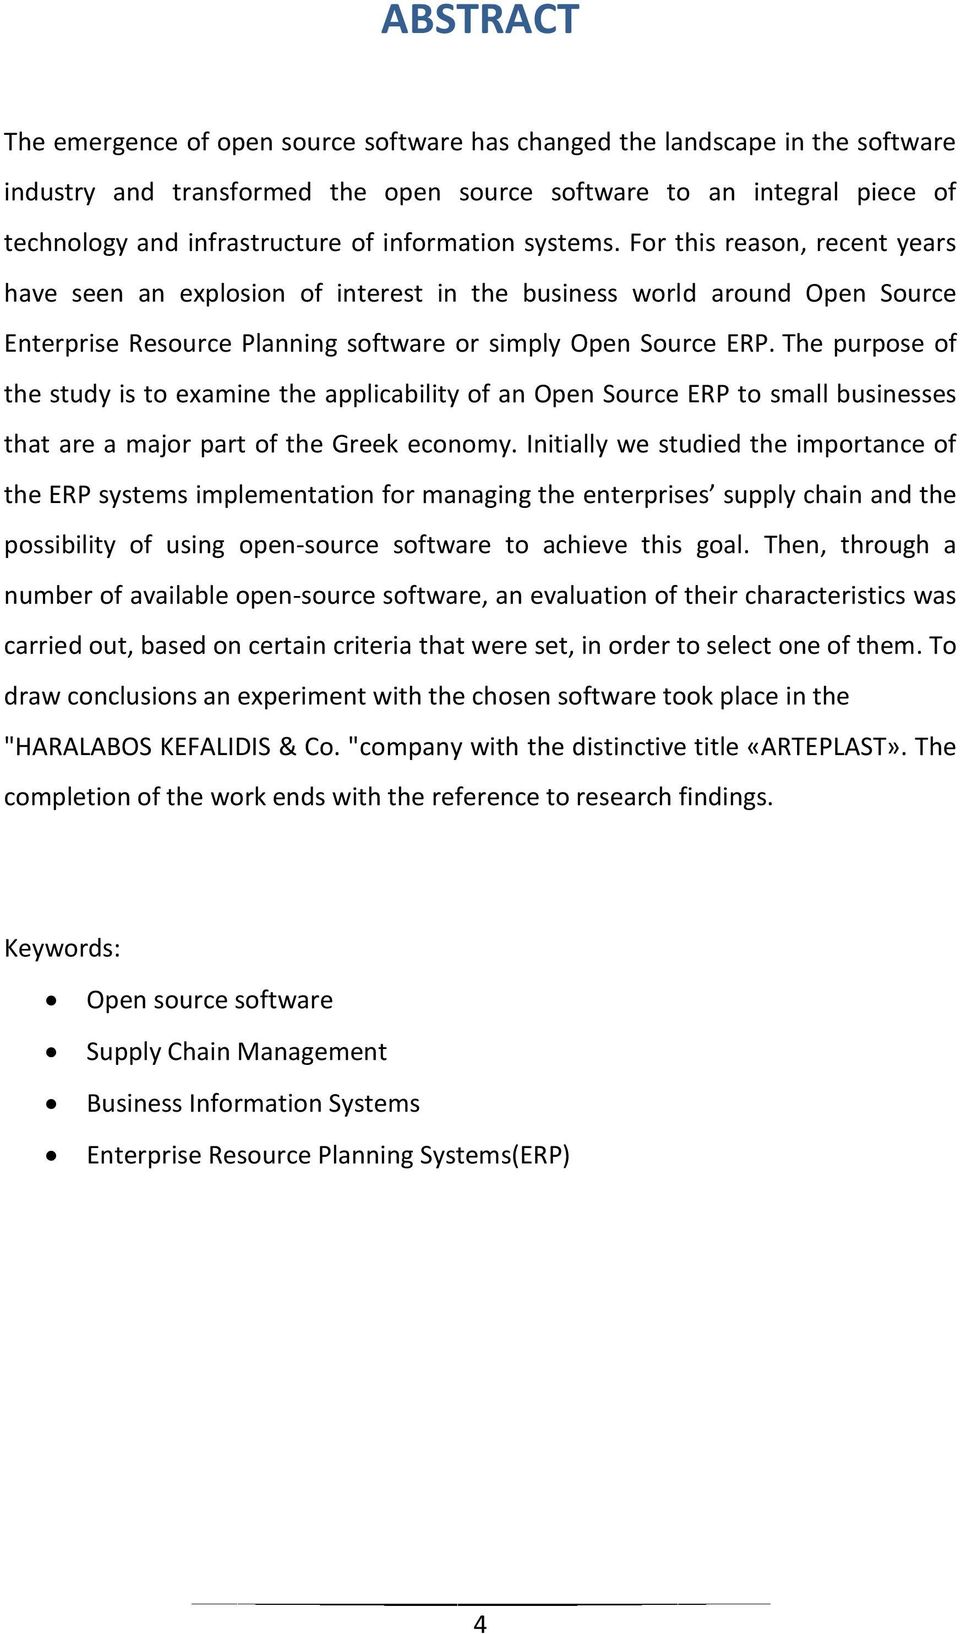 The purpose of the study is to examine the applicability of an Open Source ERP to small businesses that are a major part of the Greek economy.